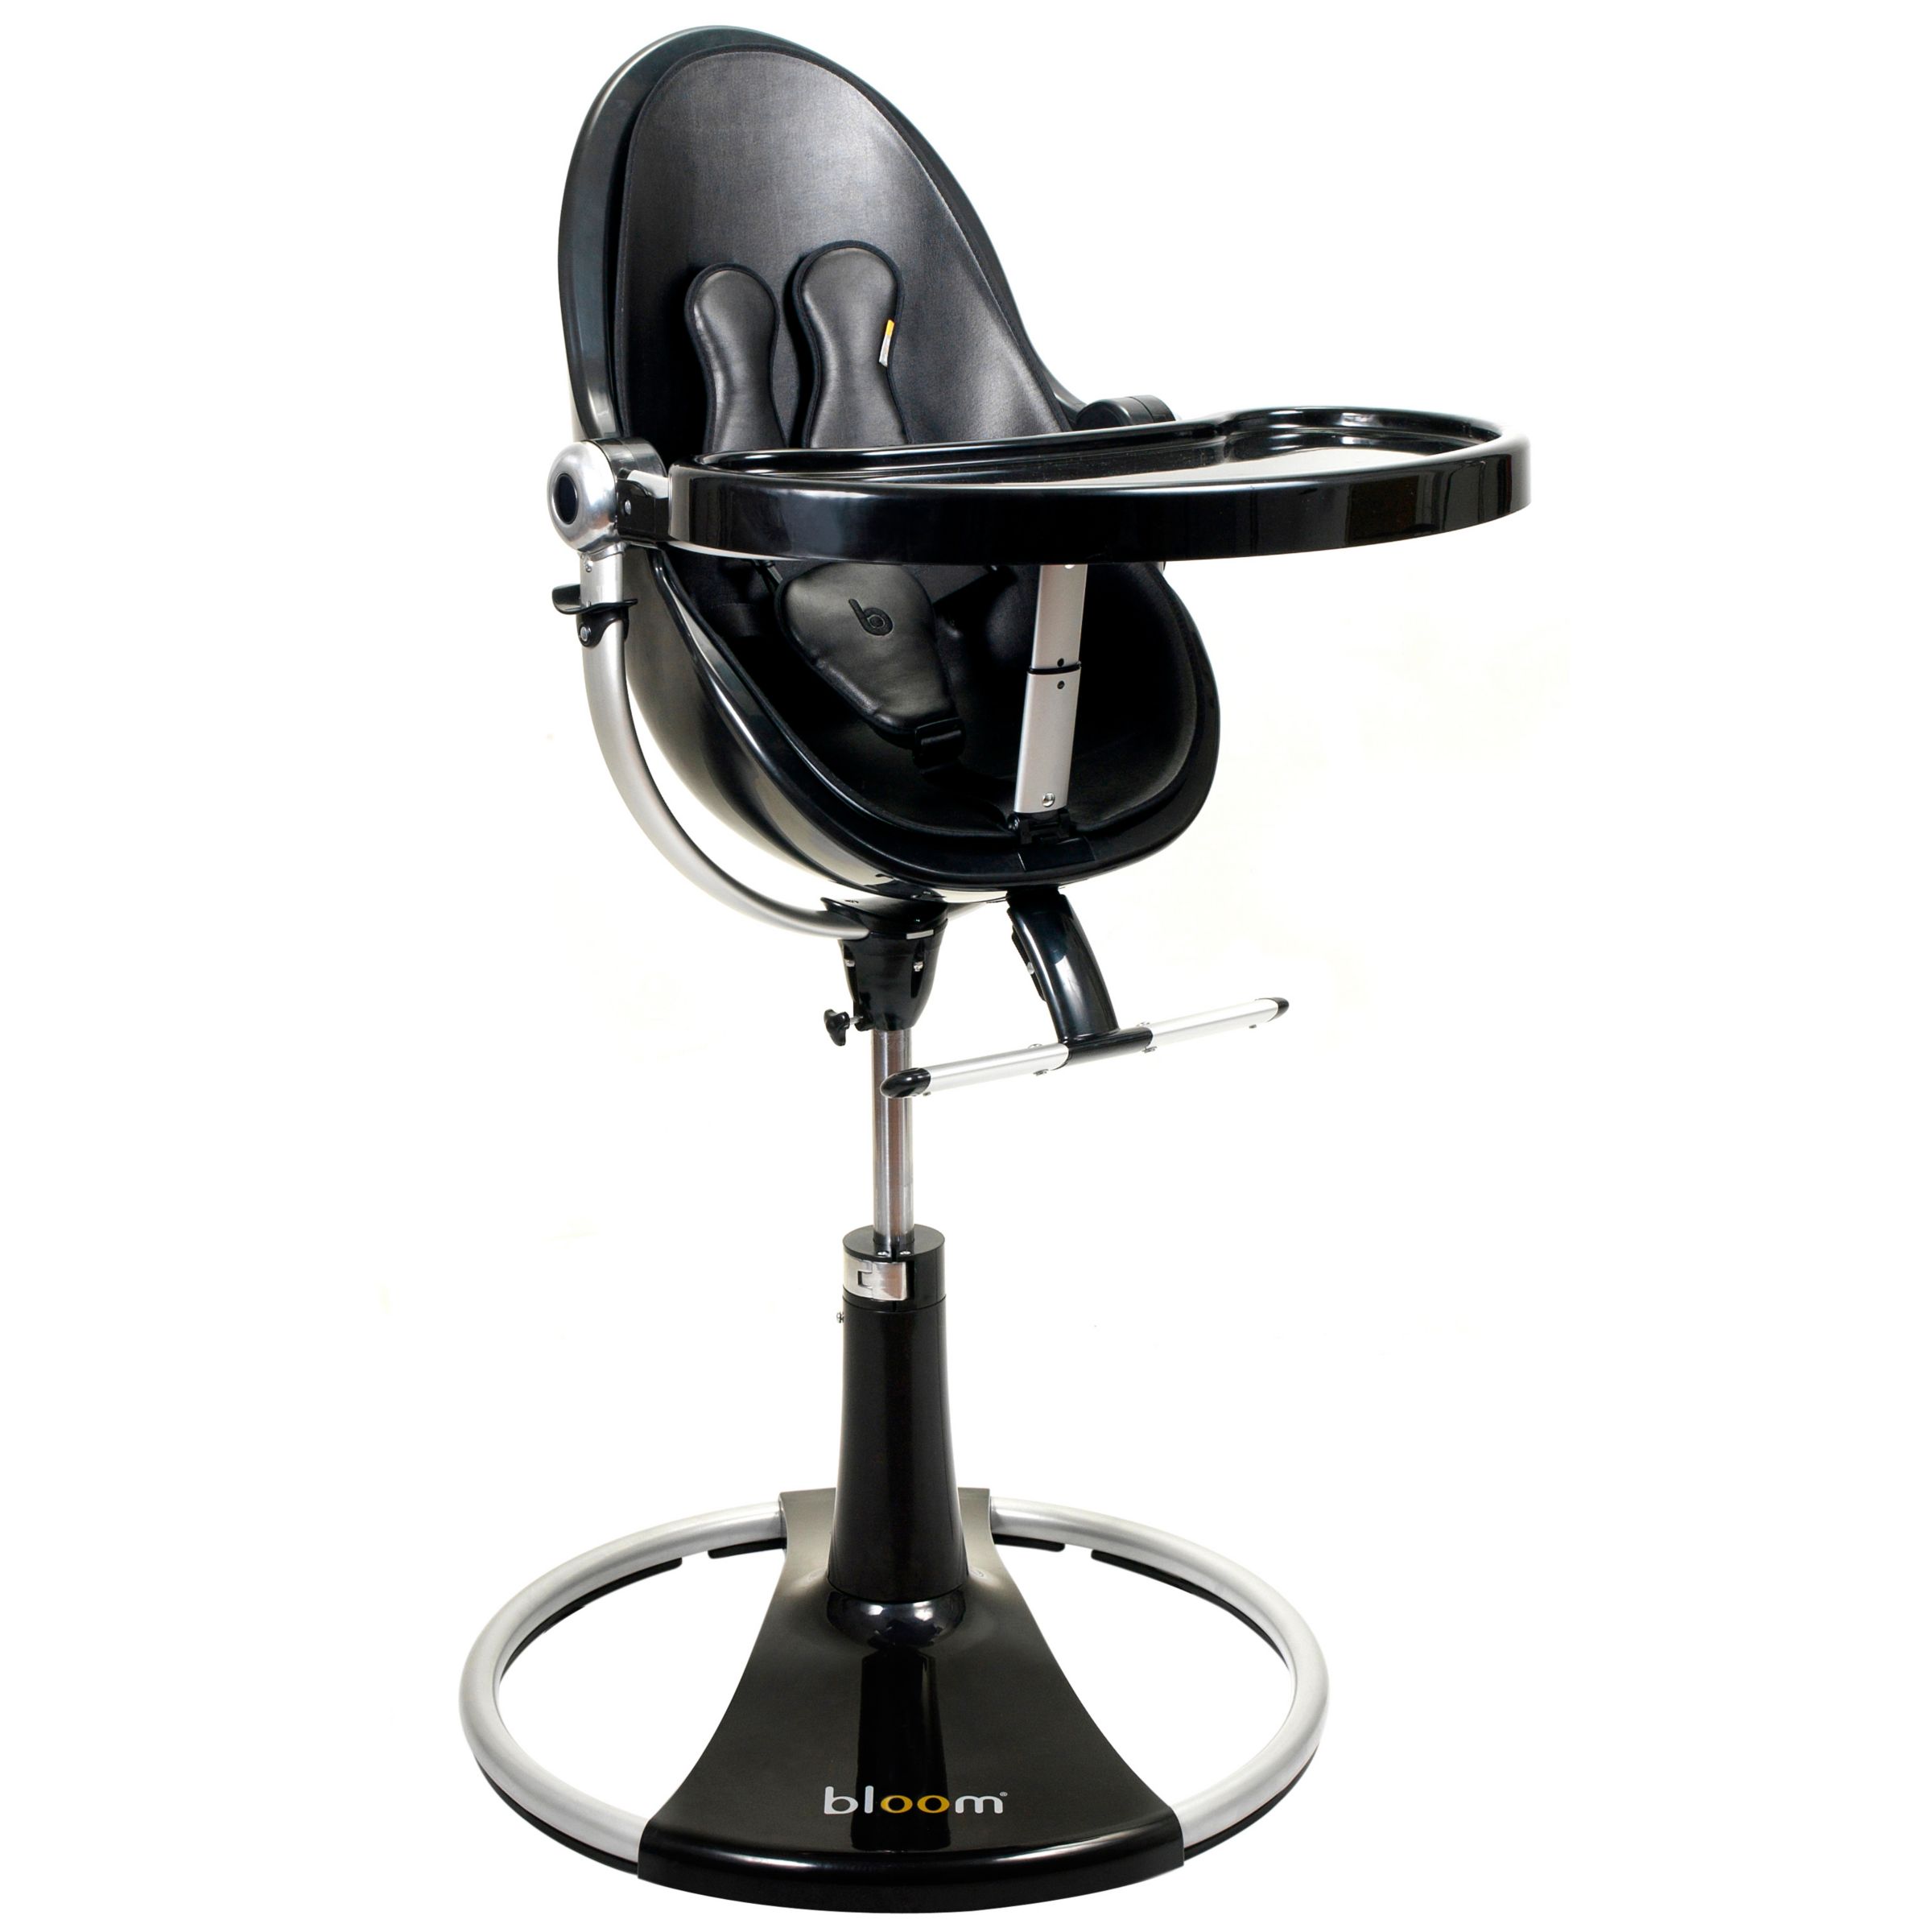 bloom Fresco Loft Contemporary Leatherette Baby Chair, Ebony Black with Midnight Black at John Lewis